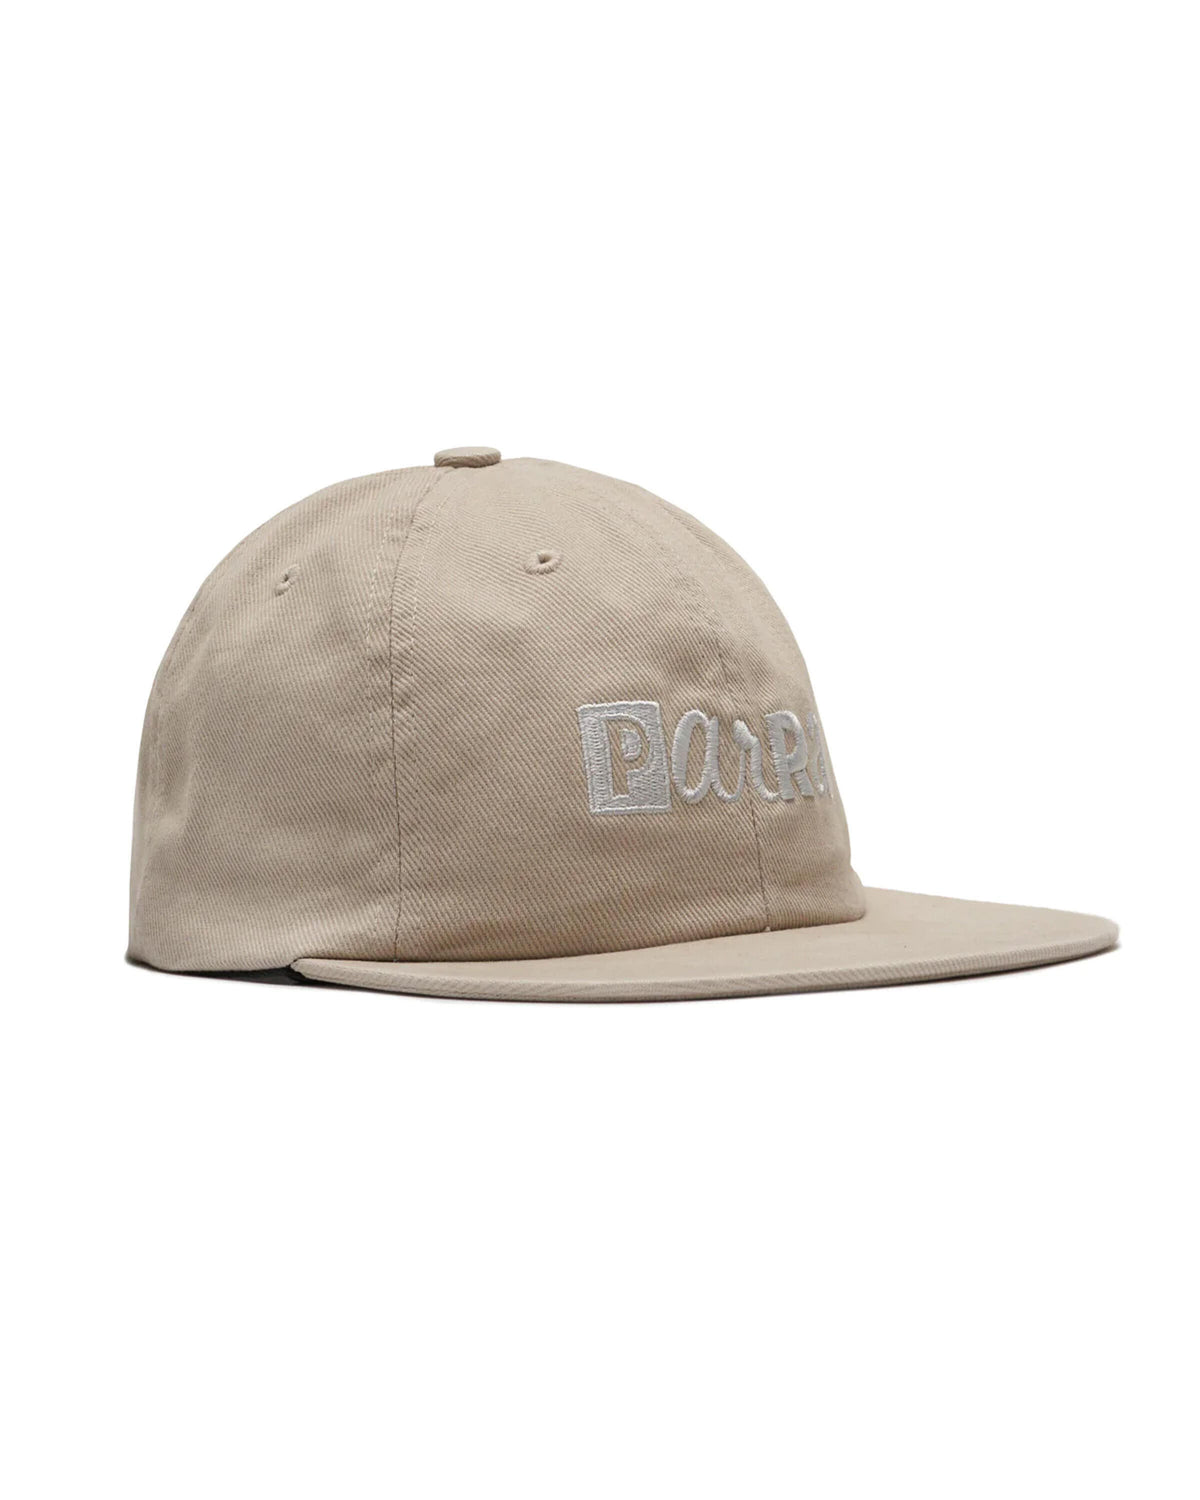 by Parra blocked logo 6 panel hat